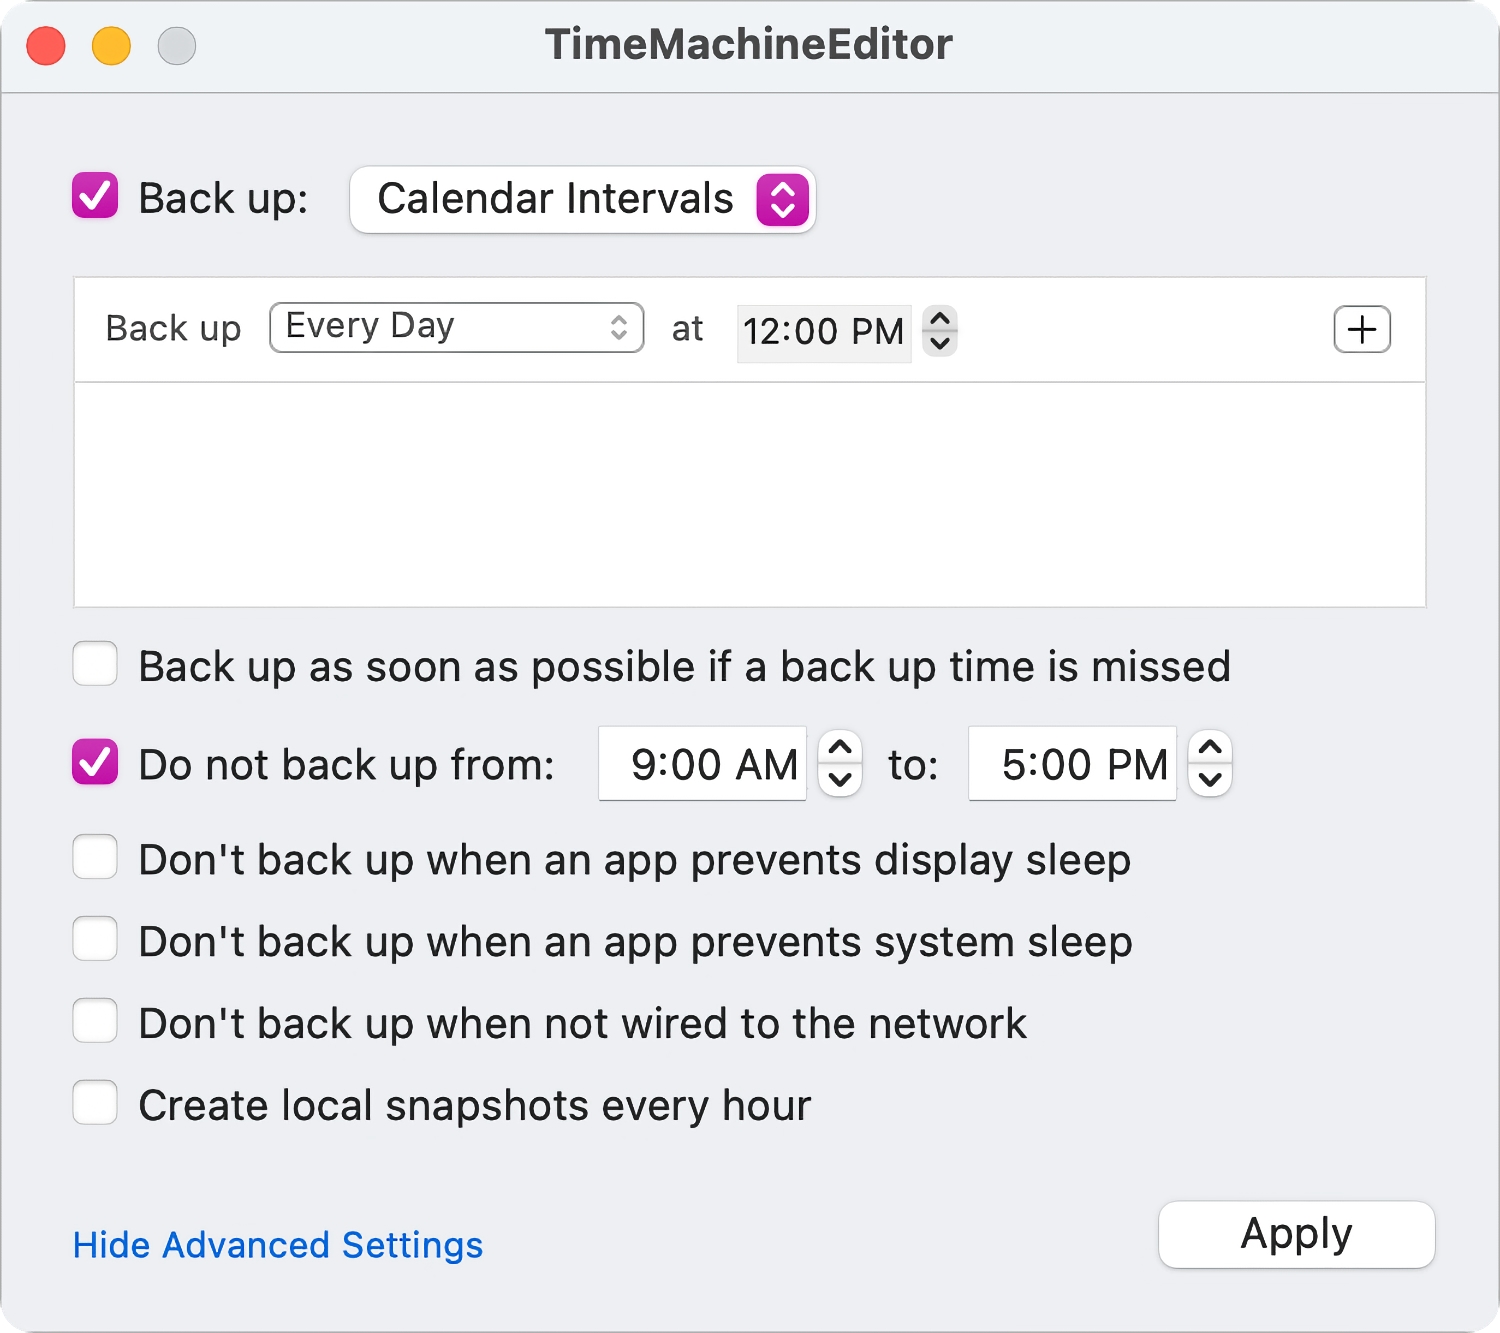 Take control of Time Machine backups with the TimeMachineEditor utility